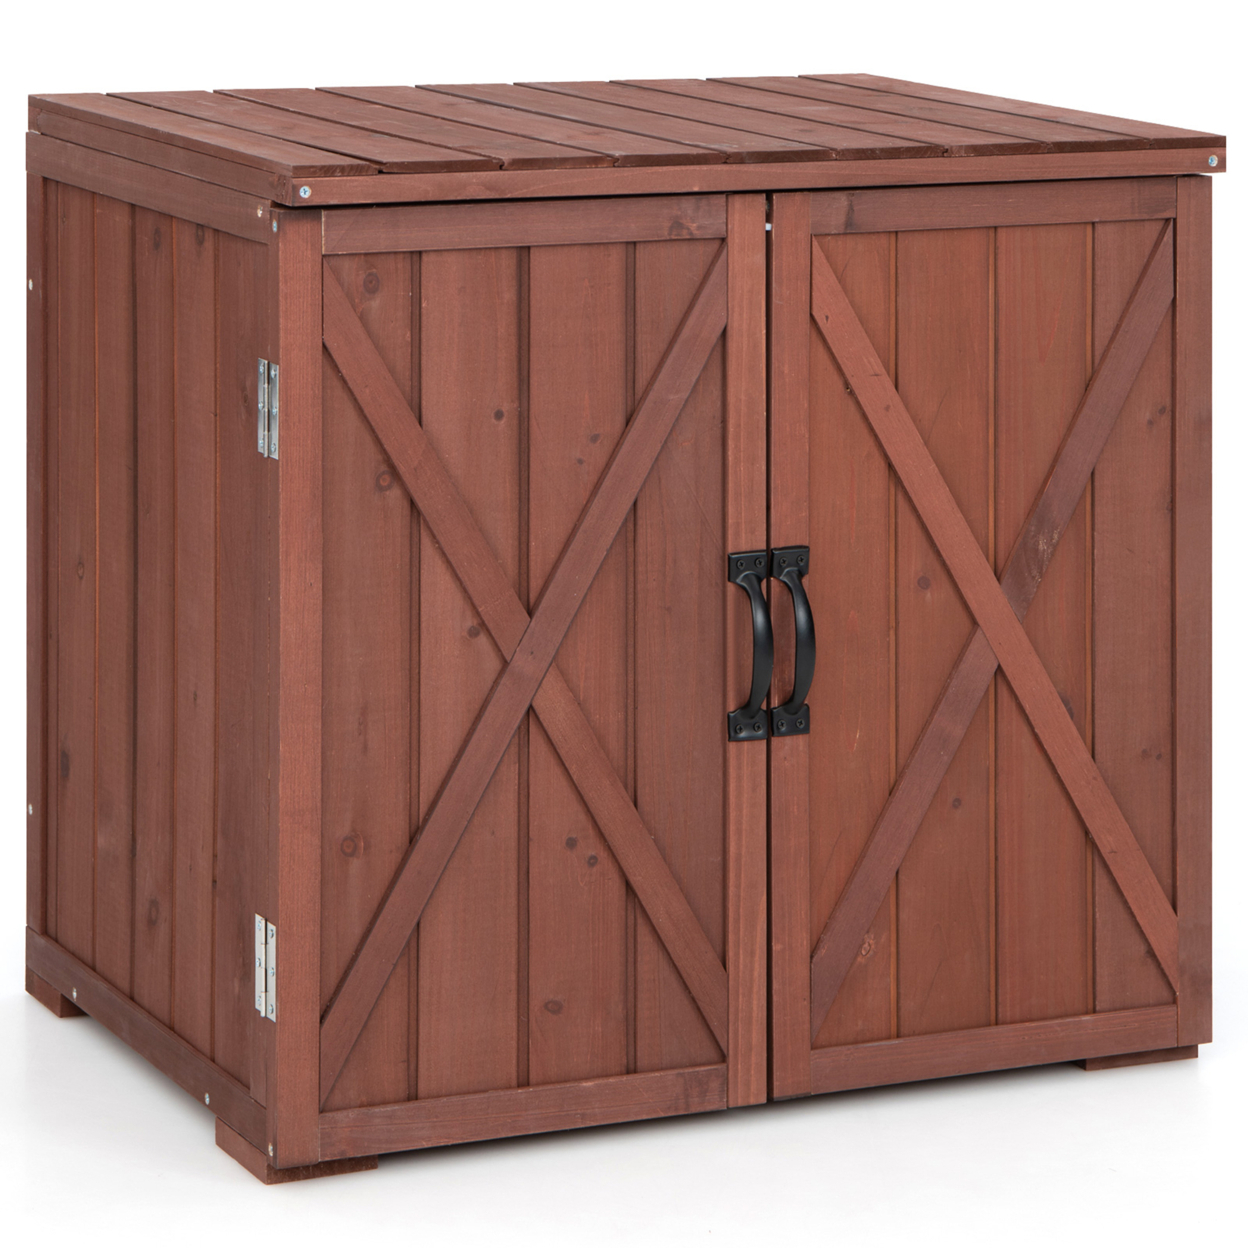 Buy Gymax 25 X 2 Ft Outdoor Wooden Storage Shed Cabinet W Double